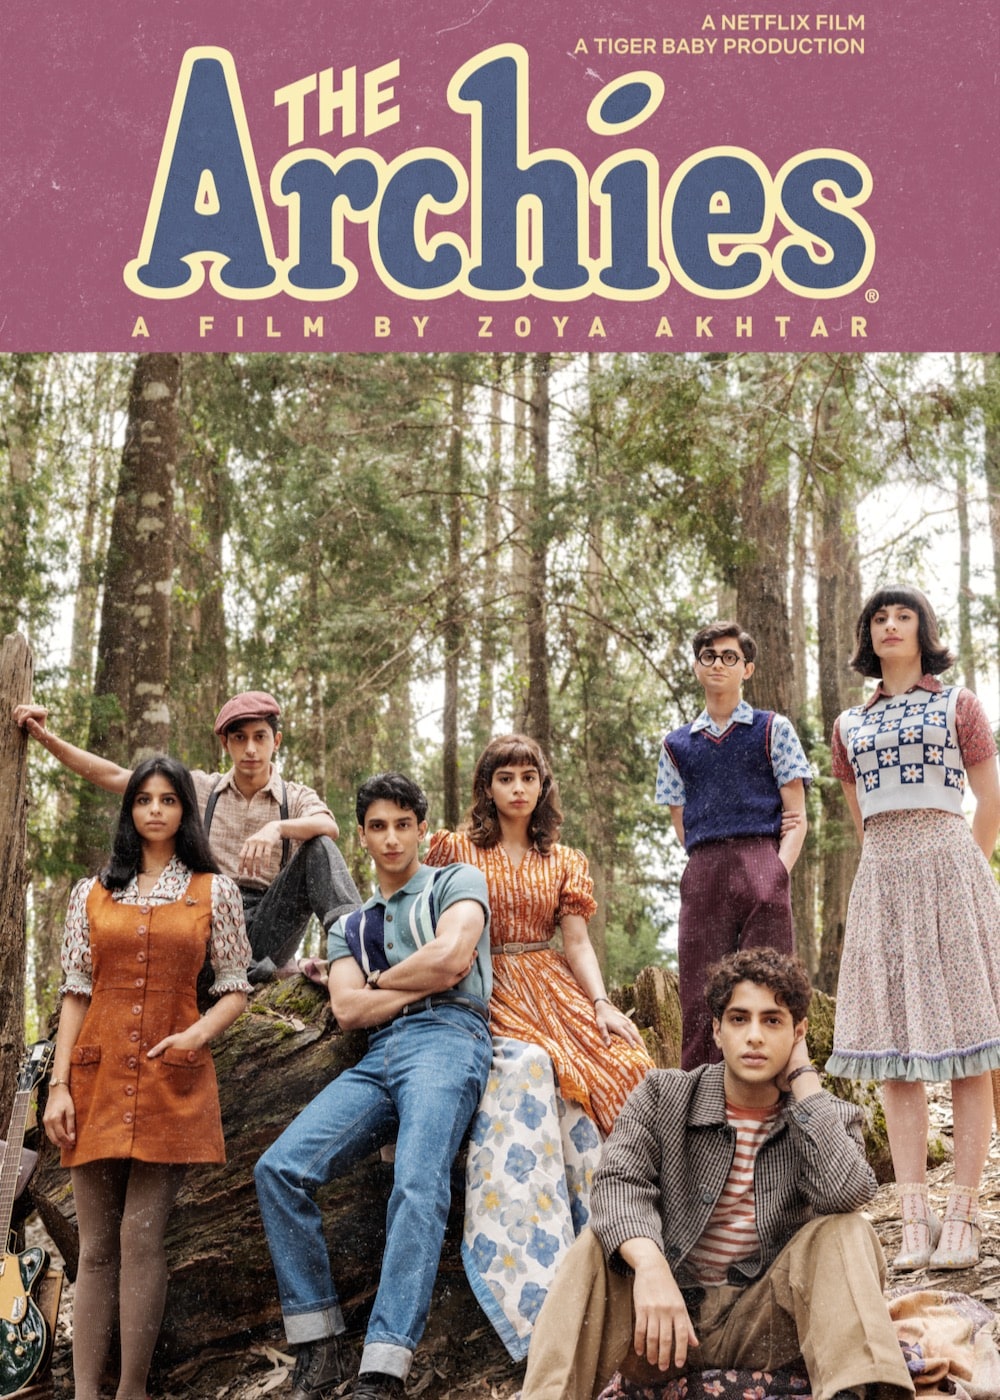 Here are 4 Reasons you should Watch Zoya Akhtar's The Archies